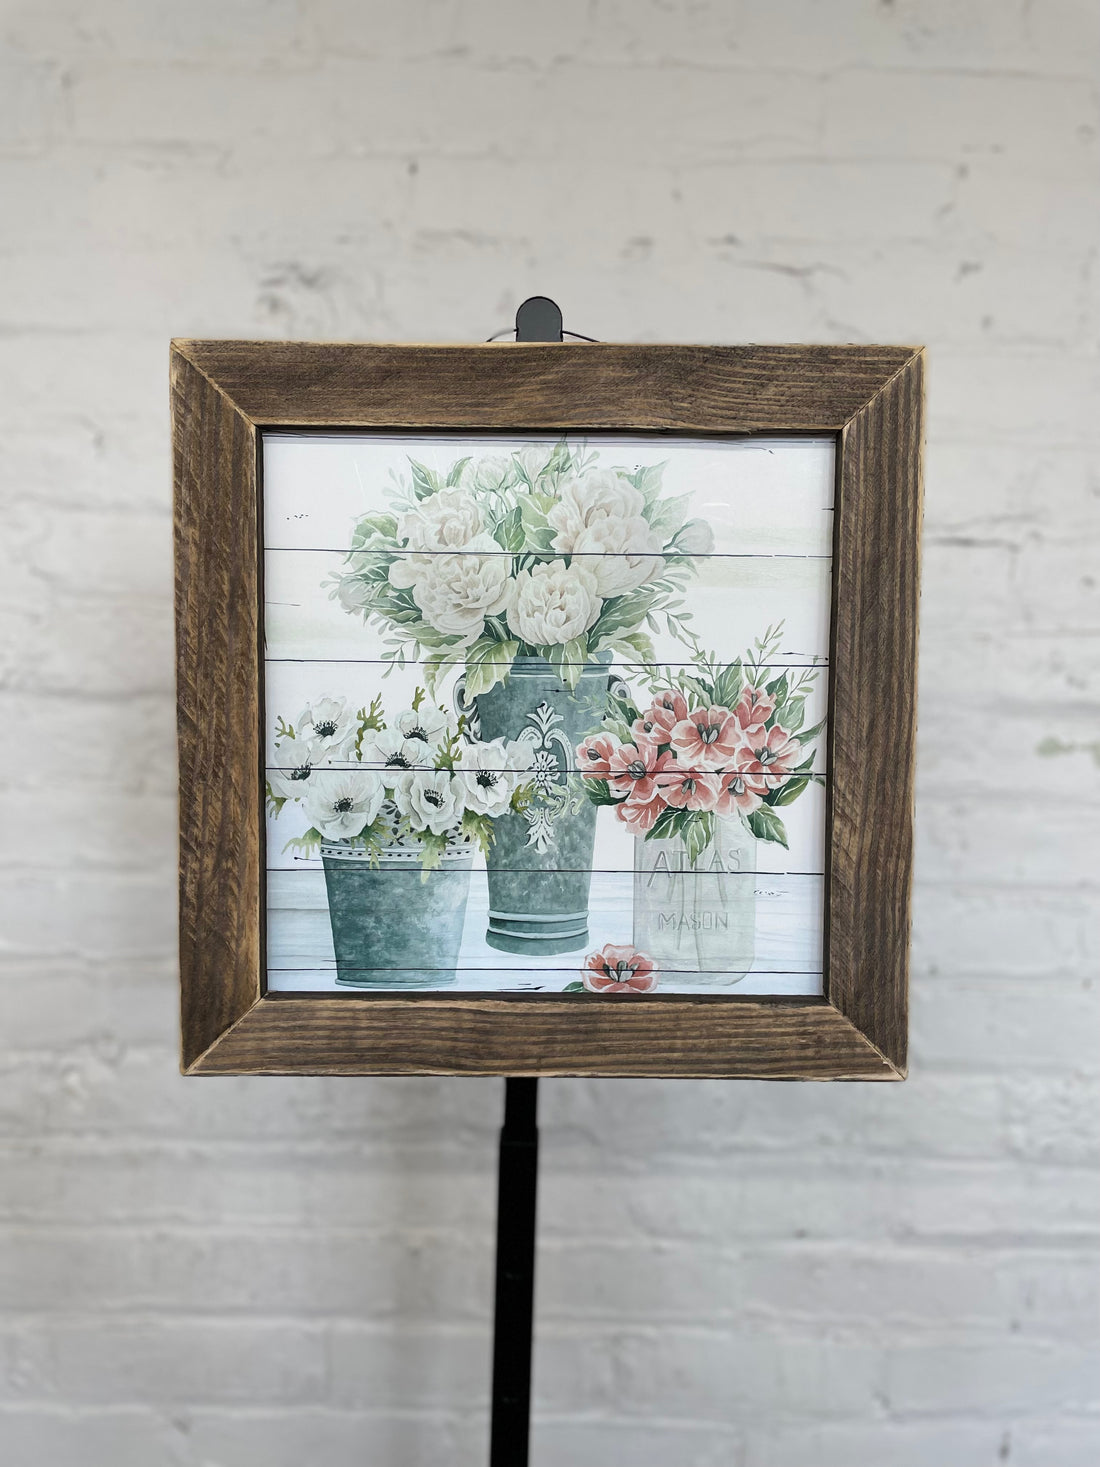 Jan Michaels' Pretty Posies Hanging Sign - Brown Stain Frame